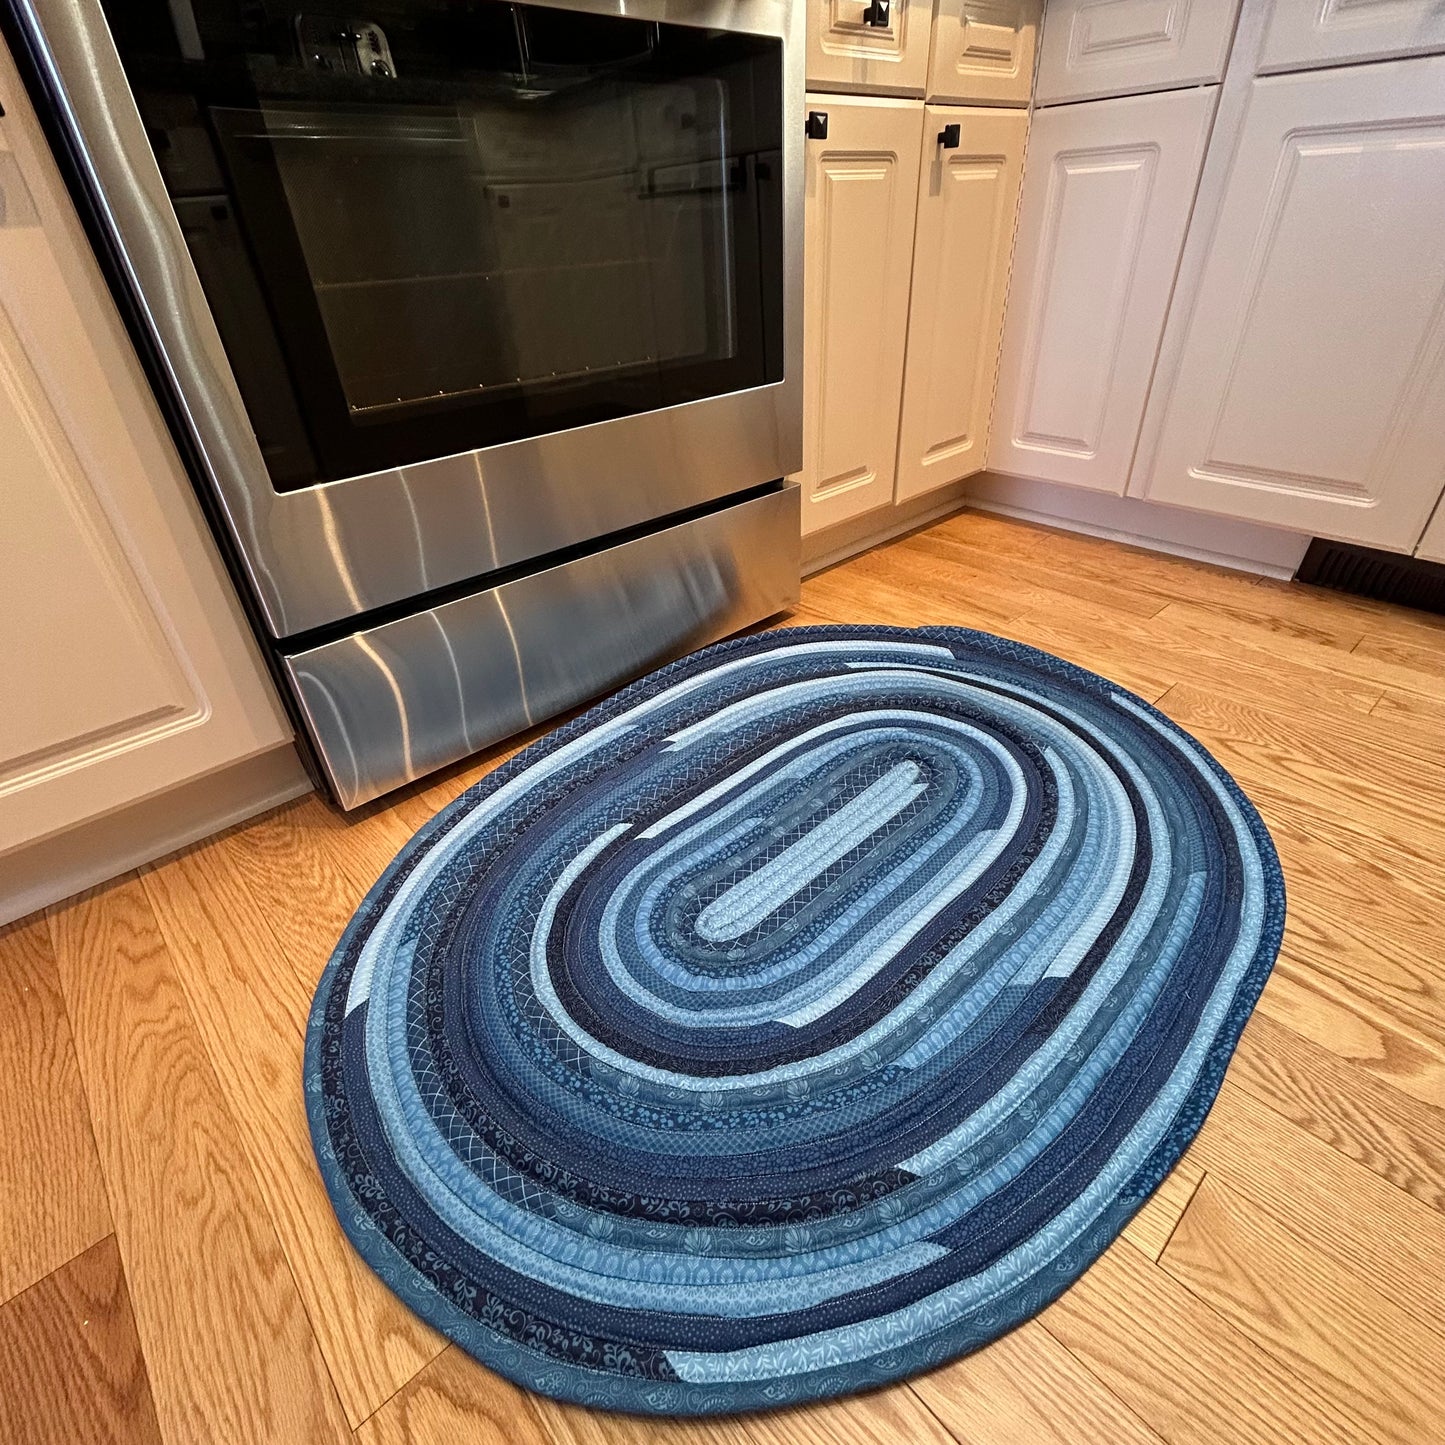 Blue Handmade Jelly Roll Rug for Kitchen. Or use as a bedside rug or luxury bathmat. It's cozy, washable, reversible and made to last. At Home Stitchery Decor we aim to bring beauty and function to home decor just like grandma used to make!